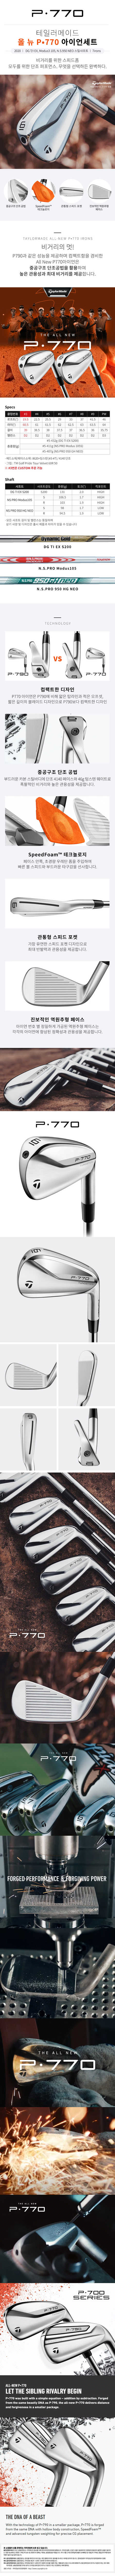 taylormade_all_new_P770_m_steel_irons_24.jpg